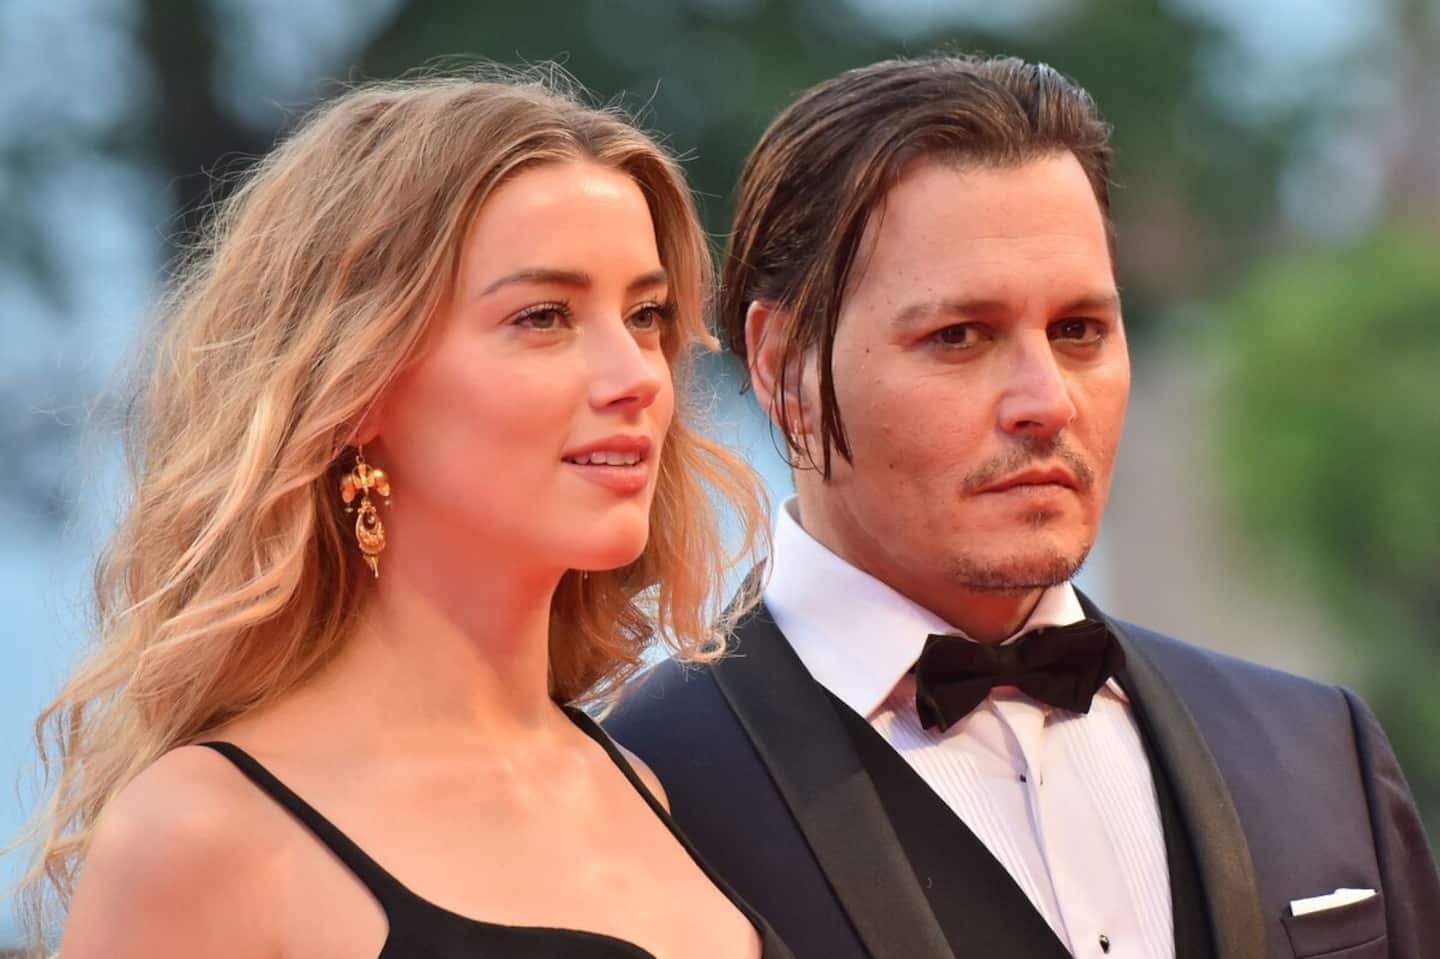 Highlights from the lawsuit between Johnny Depp and Amber Heard